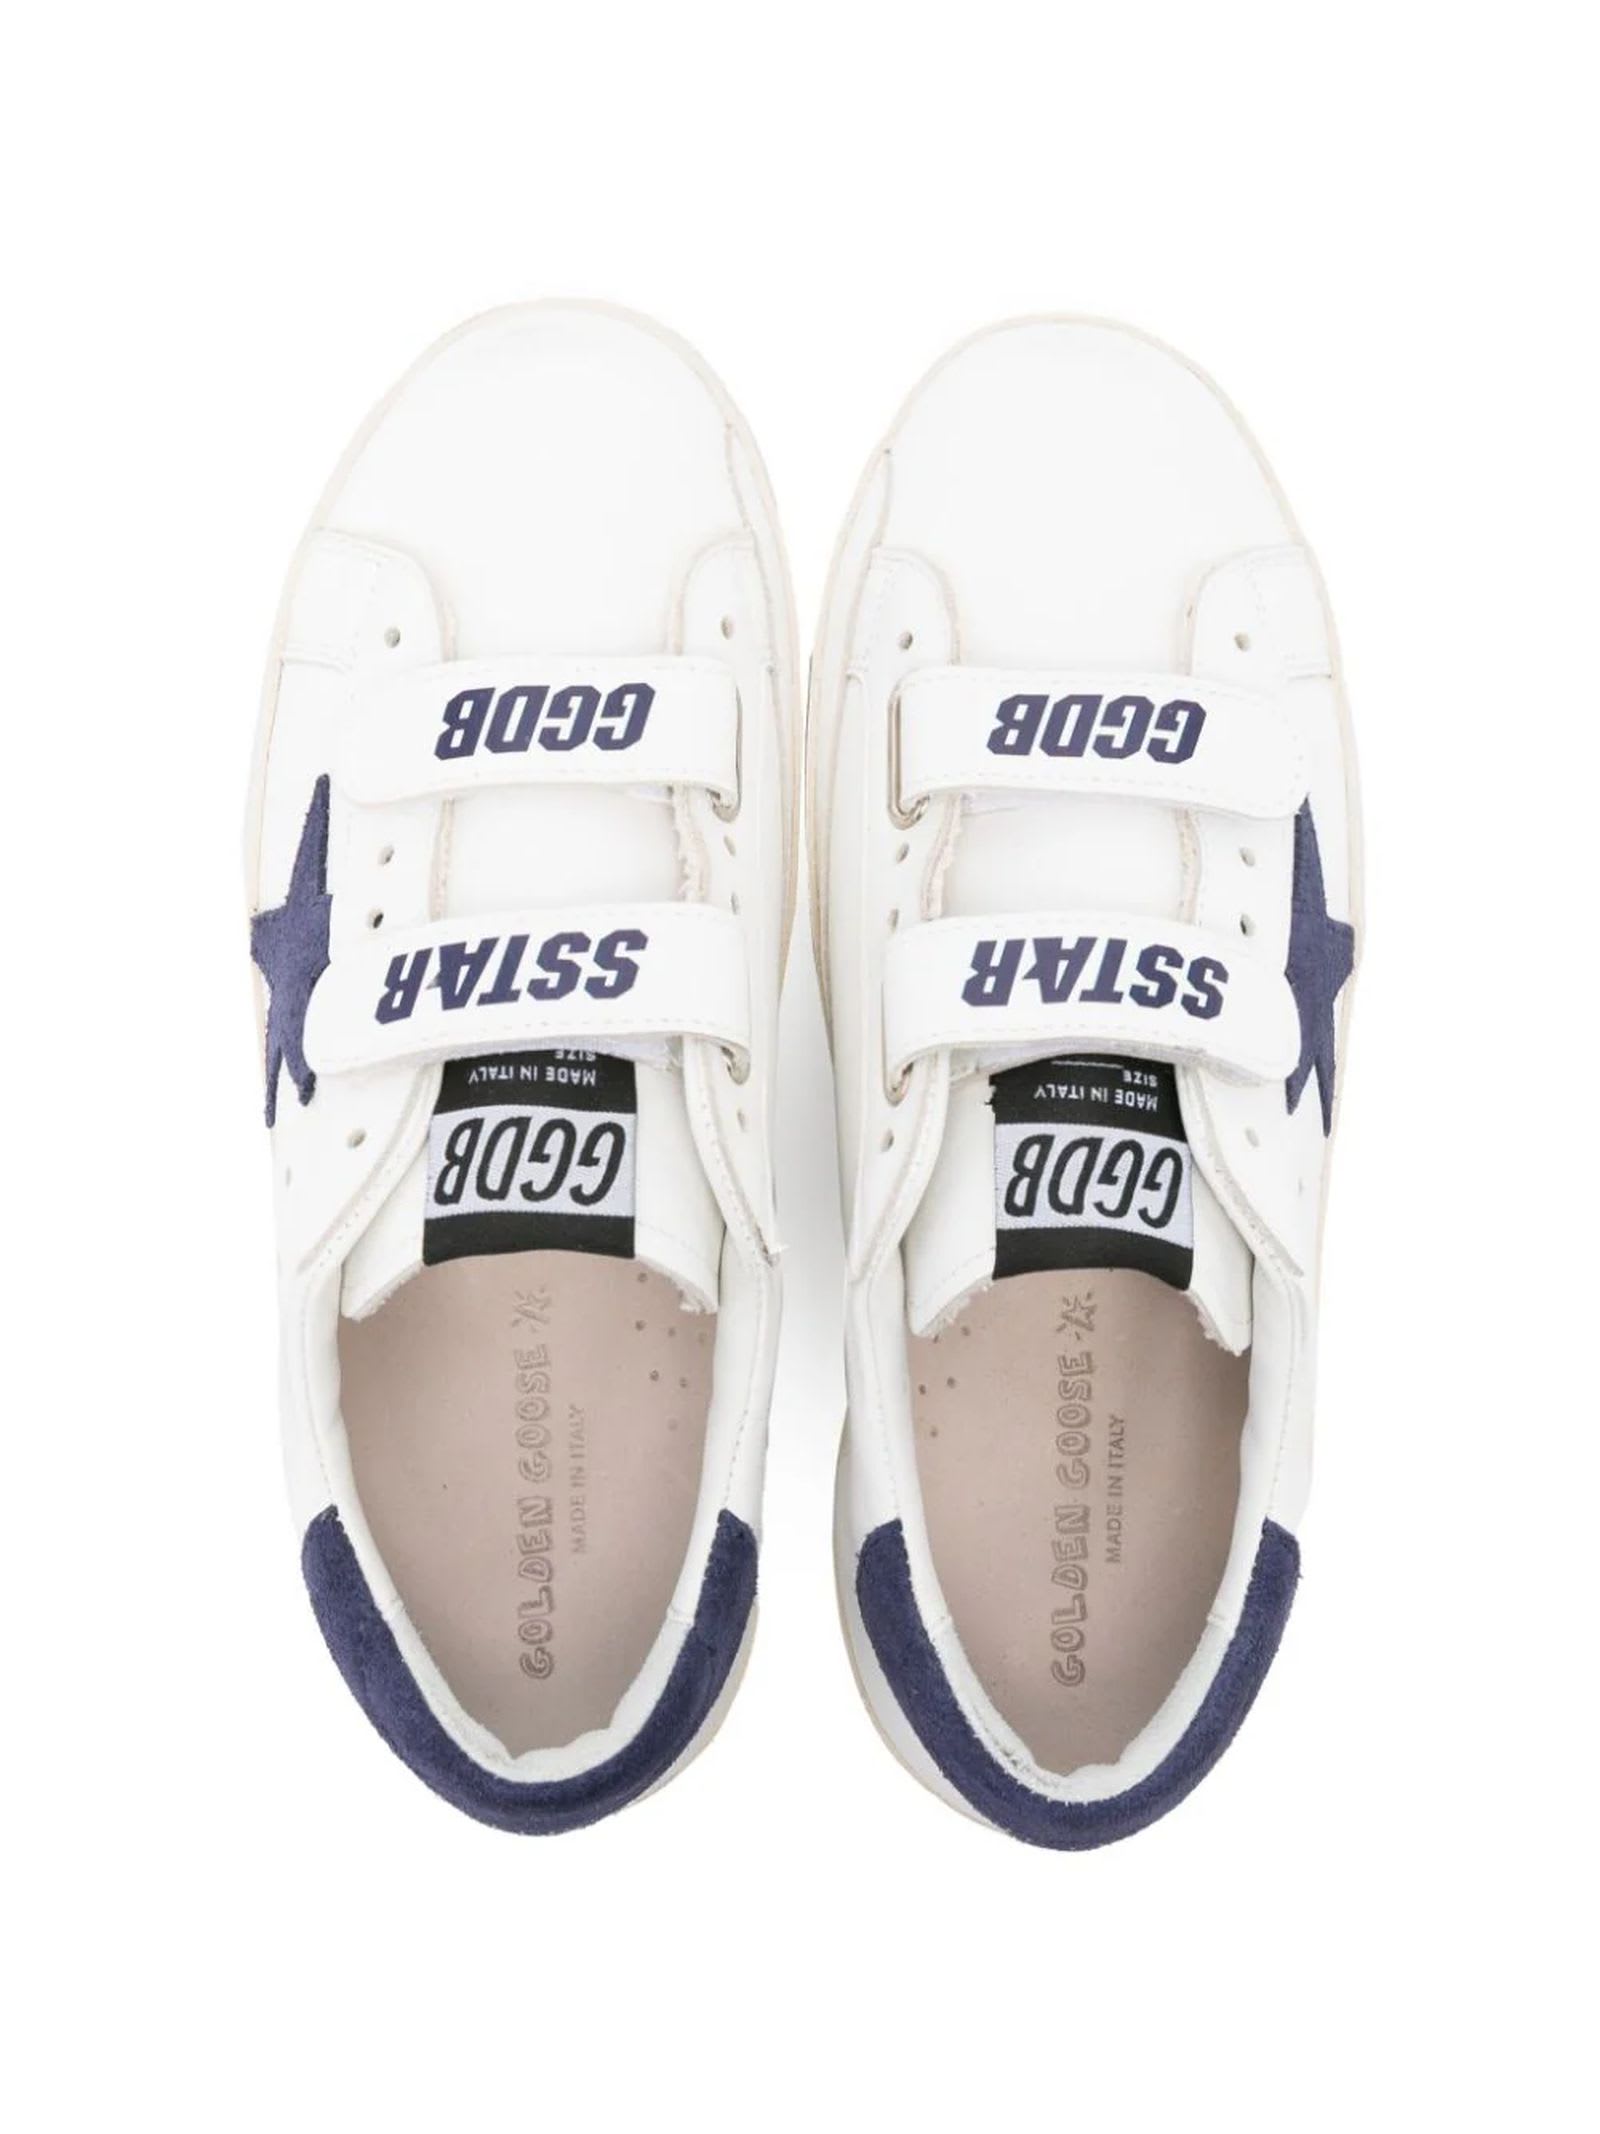 Shop Golden Goose White Leather Sneakers In White/blue Depths